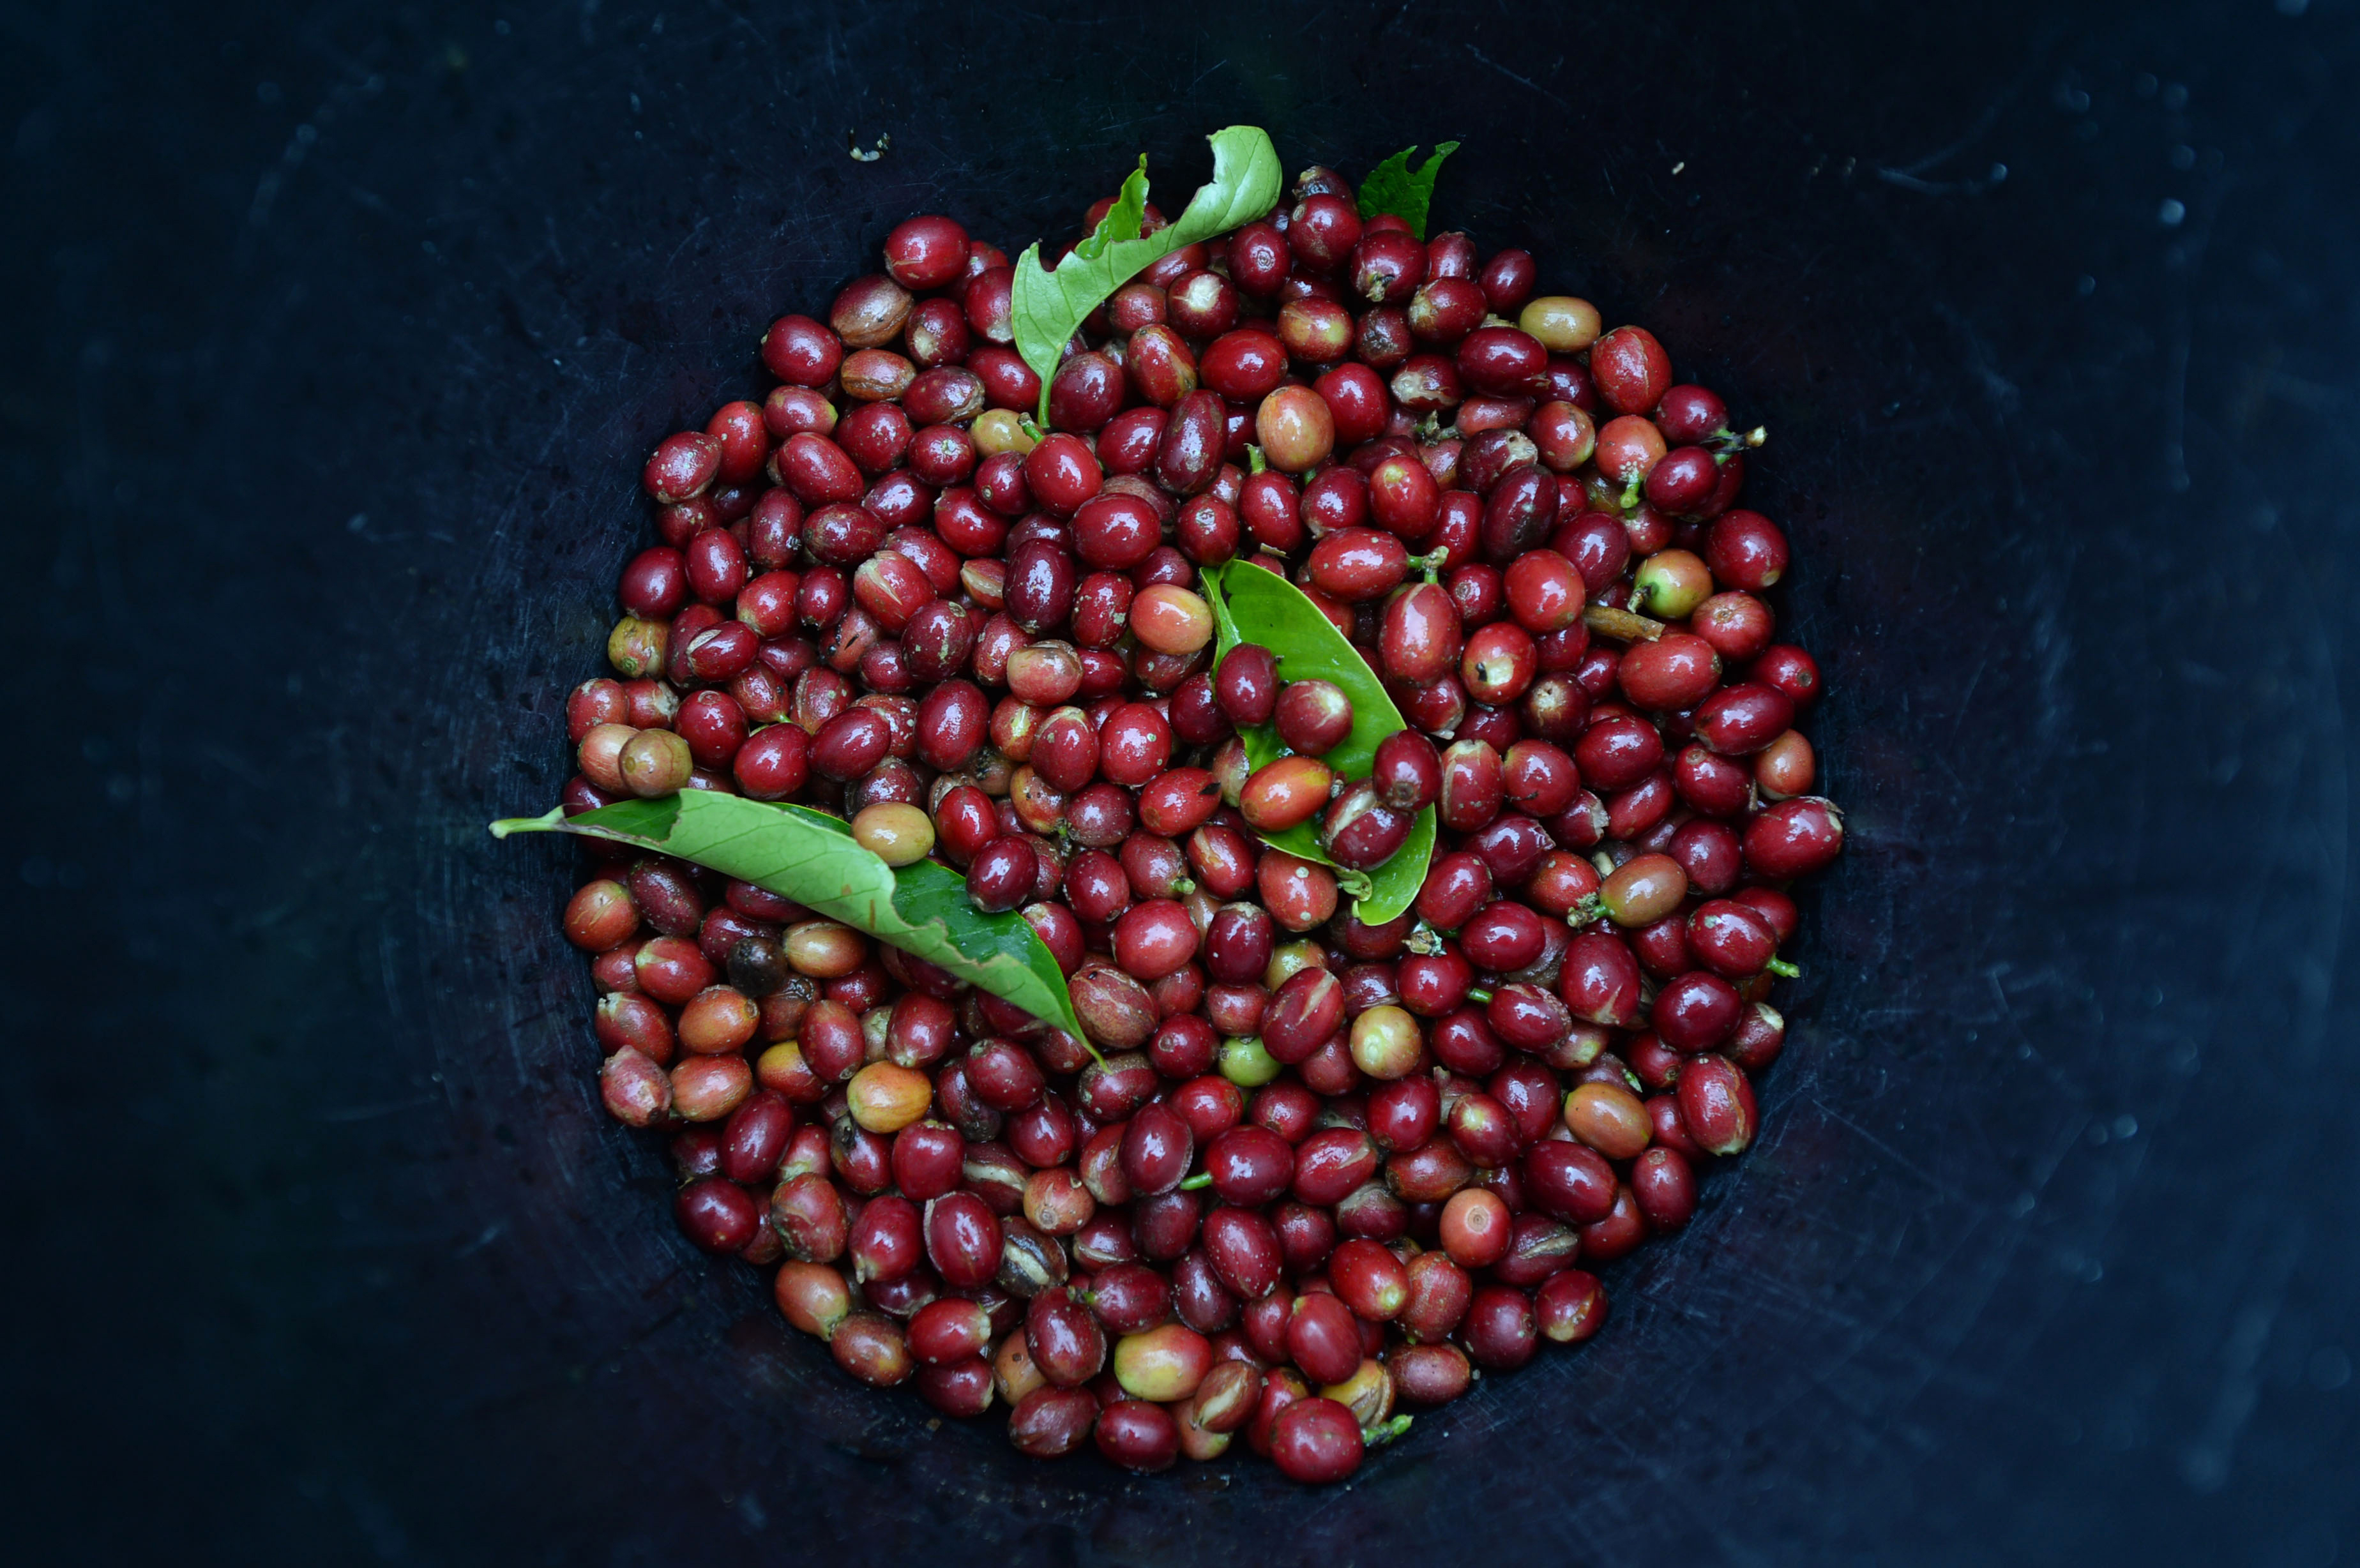 Harvested Arabica coffee cherries sit in a bowl at the Solok Radjo Cooperative coffee farm in Alahan Panjang, West Sumatra, Indonesia, on Friday, July 15, 2016. Coffee production in Indonesia will probably drop 10 percent this year after dry weather caused by the worst El Nino in almost two decades damaged some crops and delayed the harvest. (Dimas Ardian/Bloomberg via Getty Images)